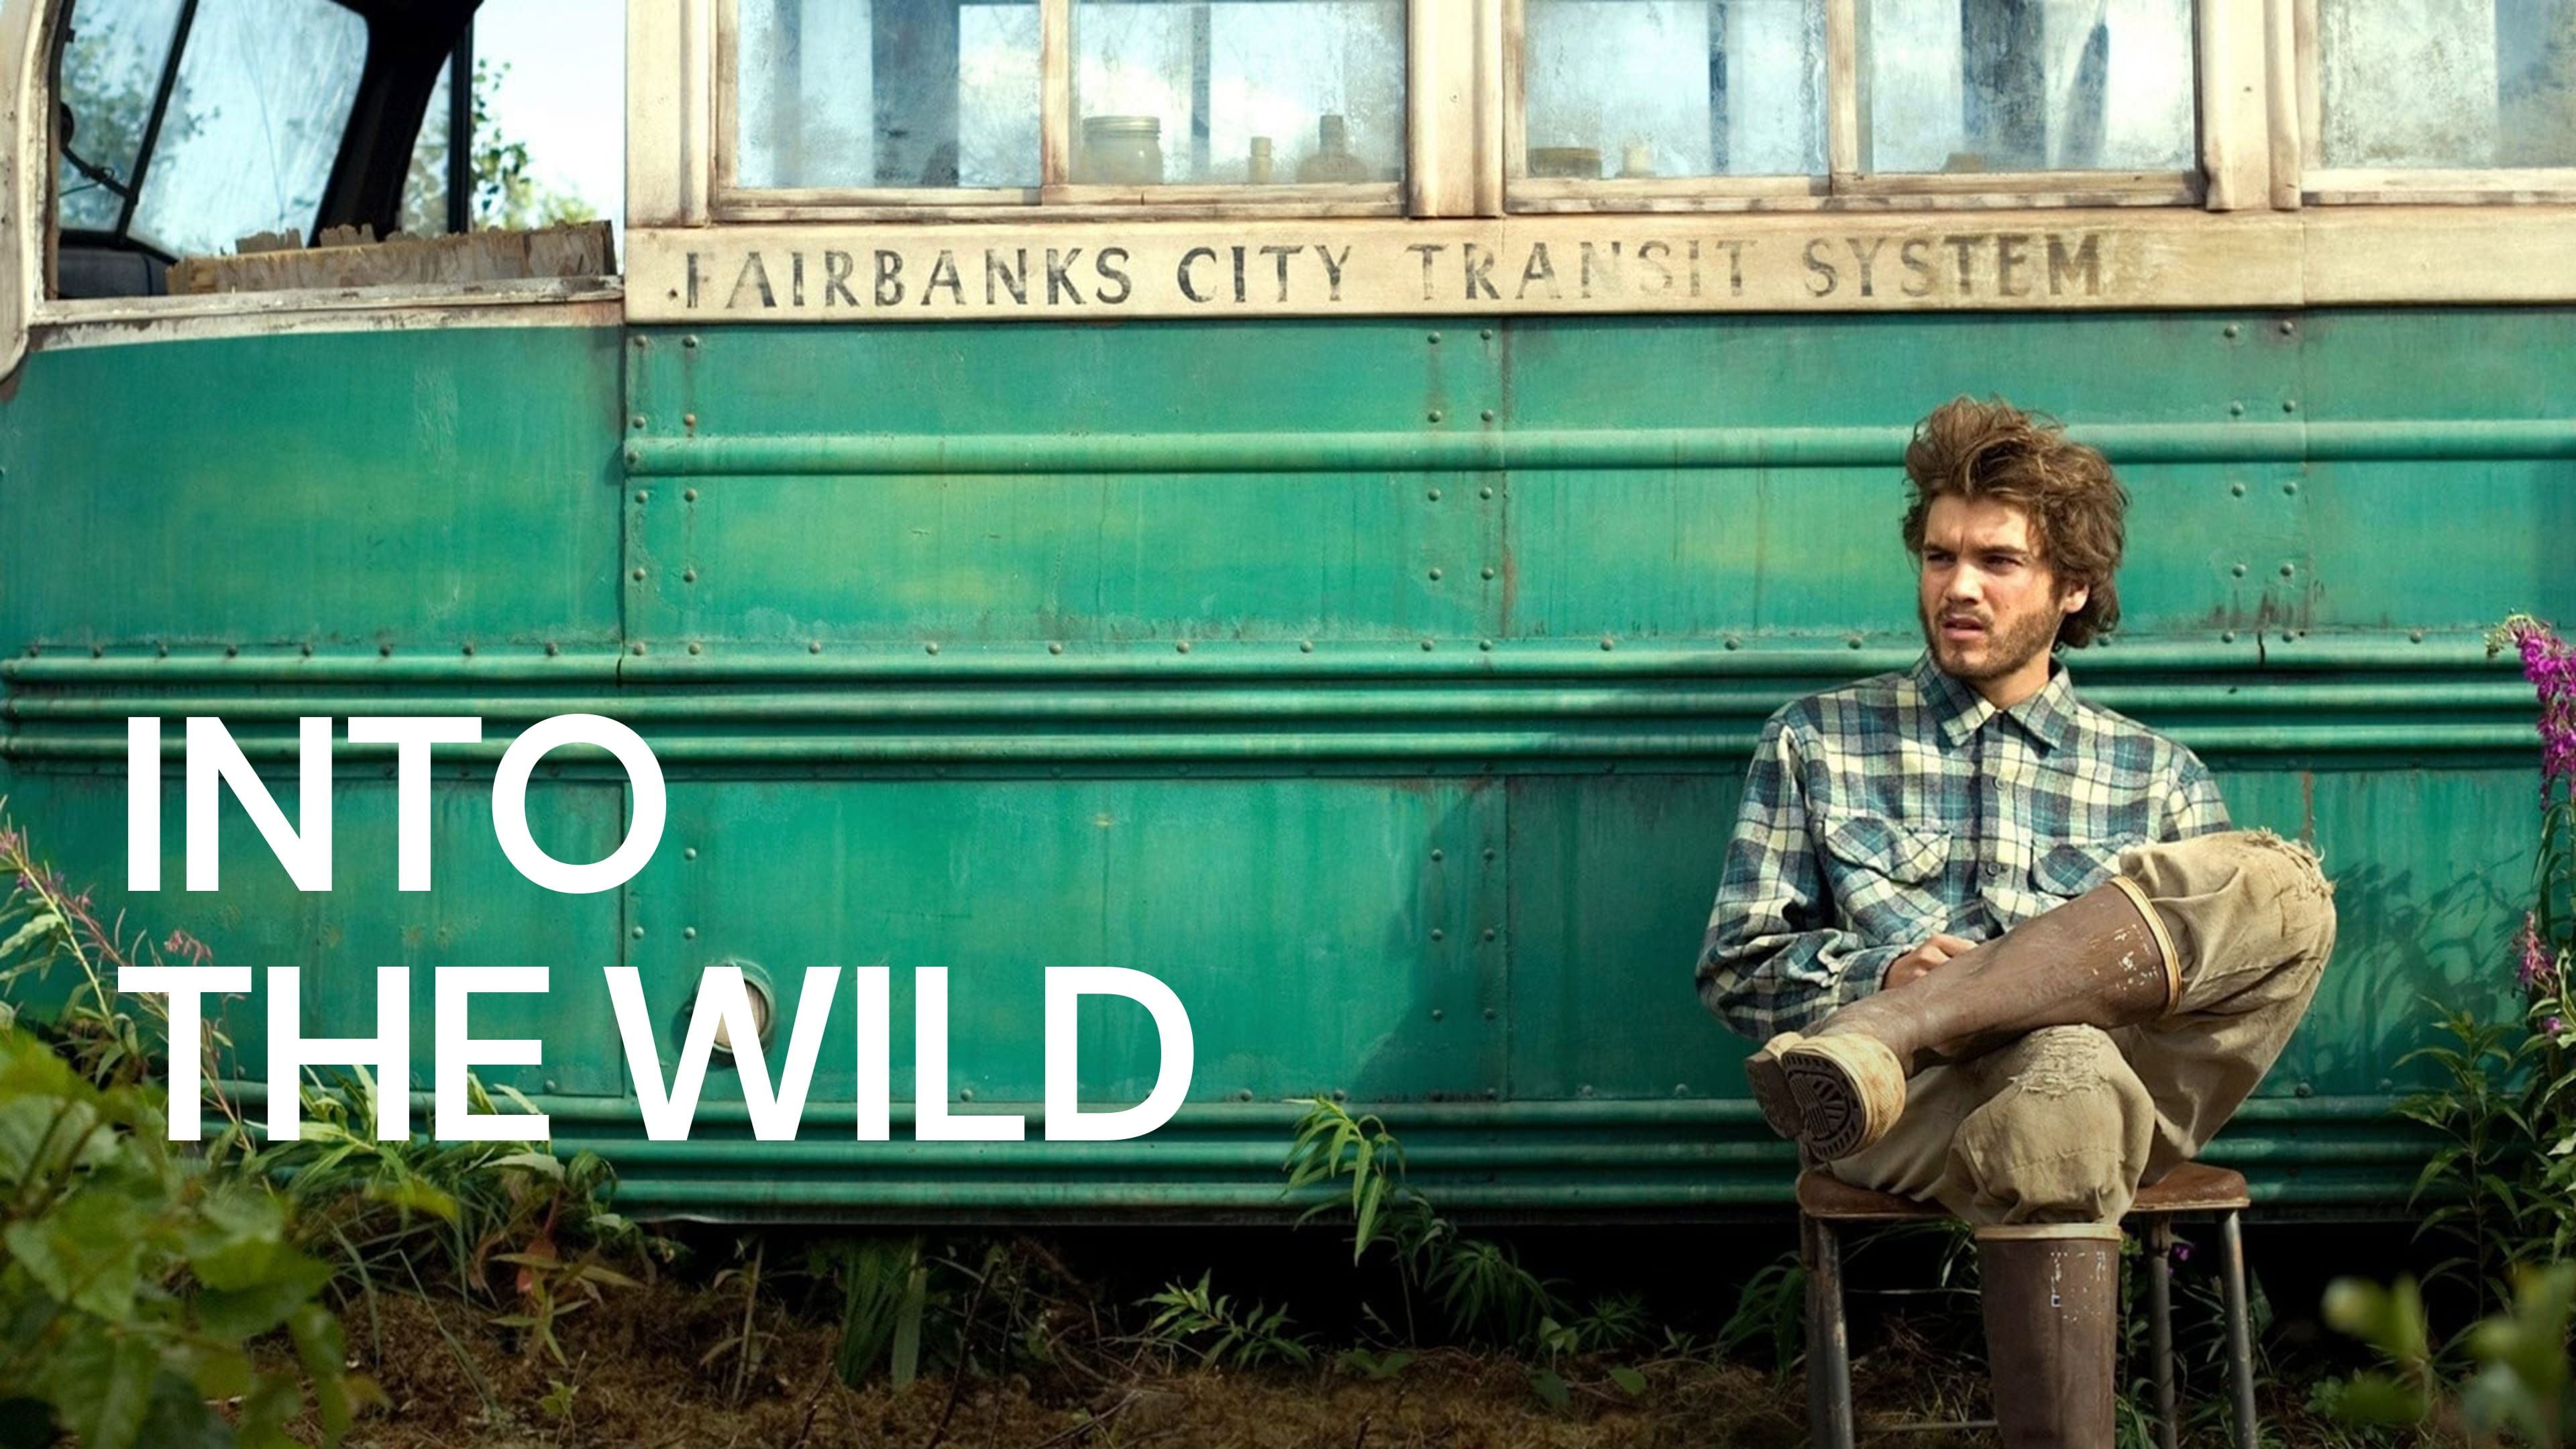 34-facts-about-the-movie-into-the-wild